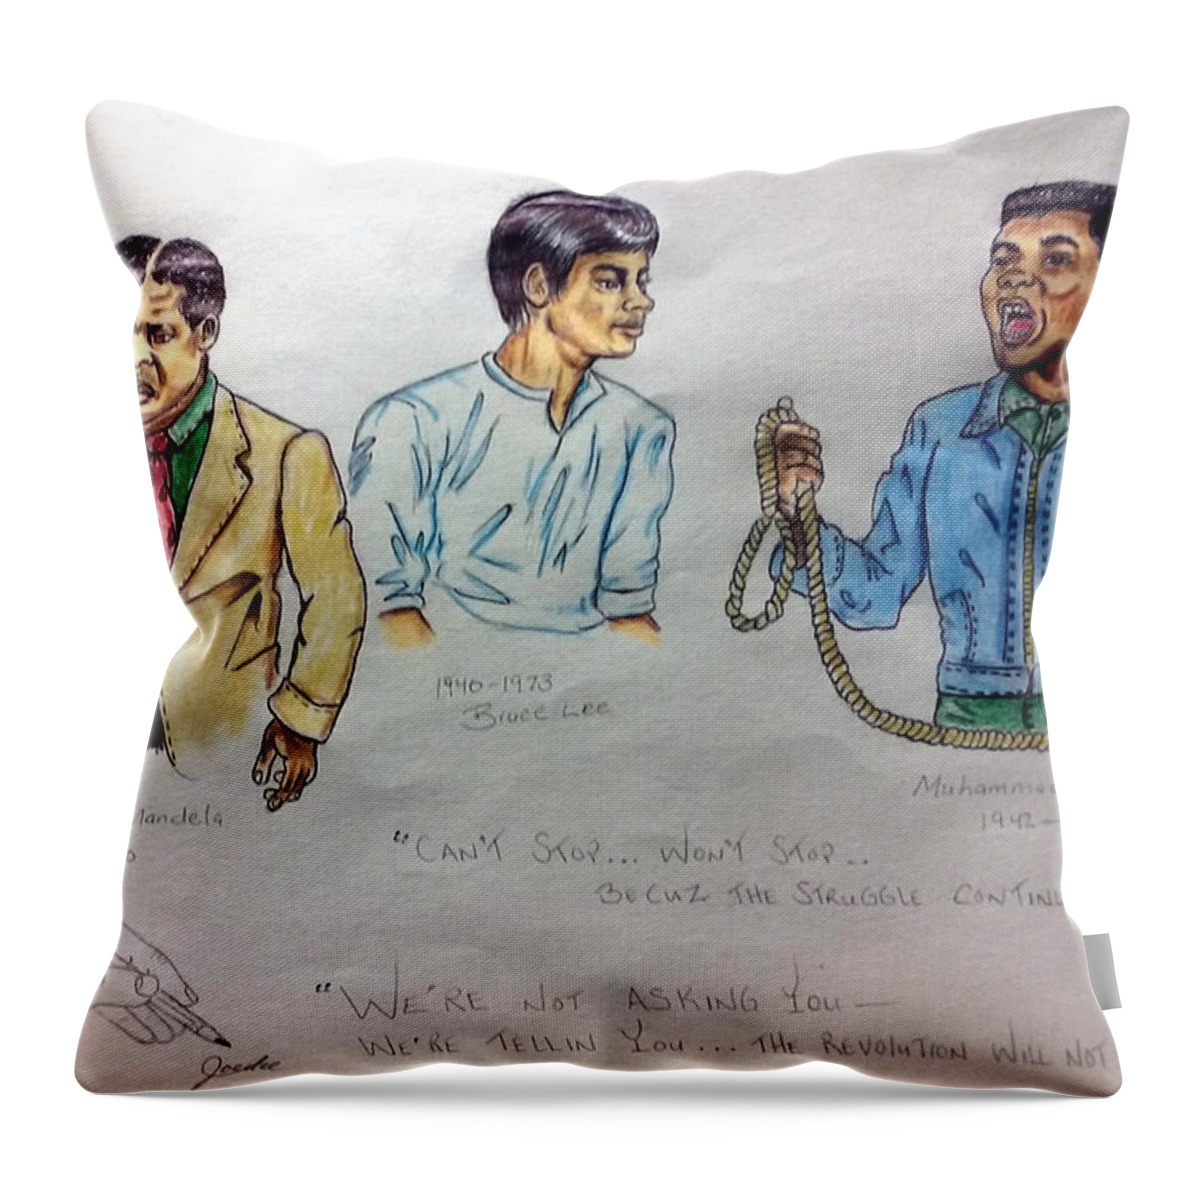 Black Art Throw Pillow featuring the drawing Mandela, Bruce, and Ali by Joedee